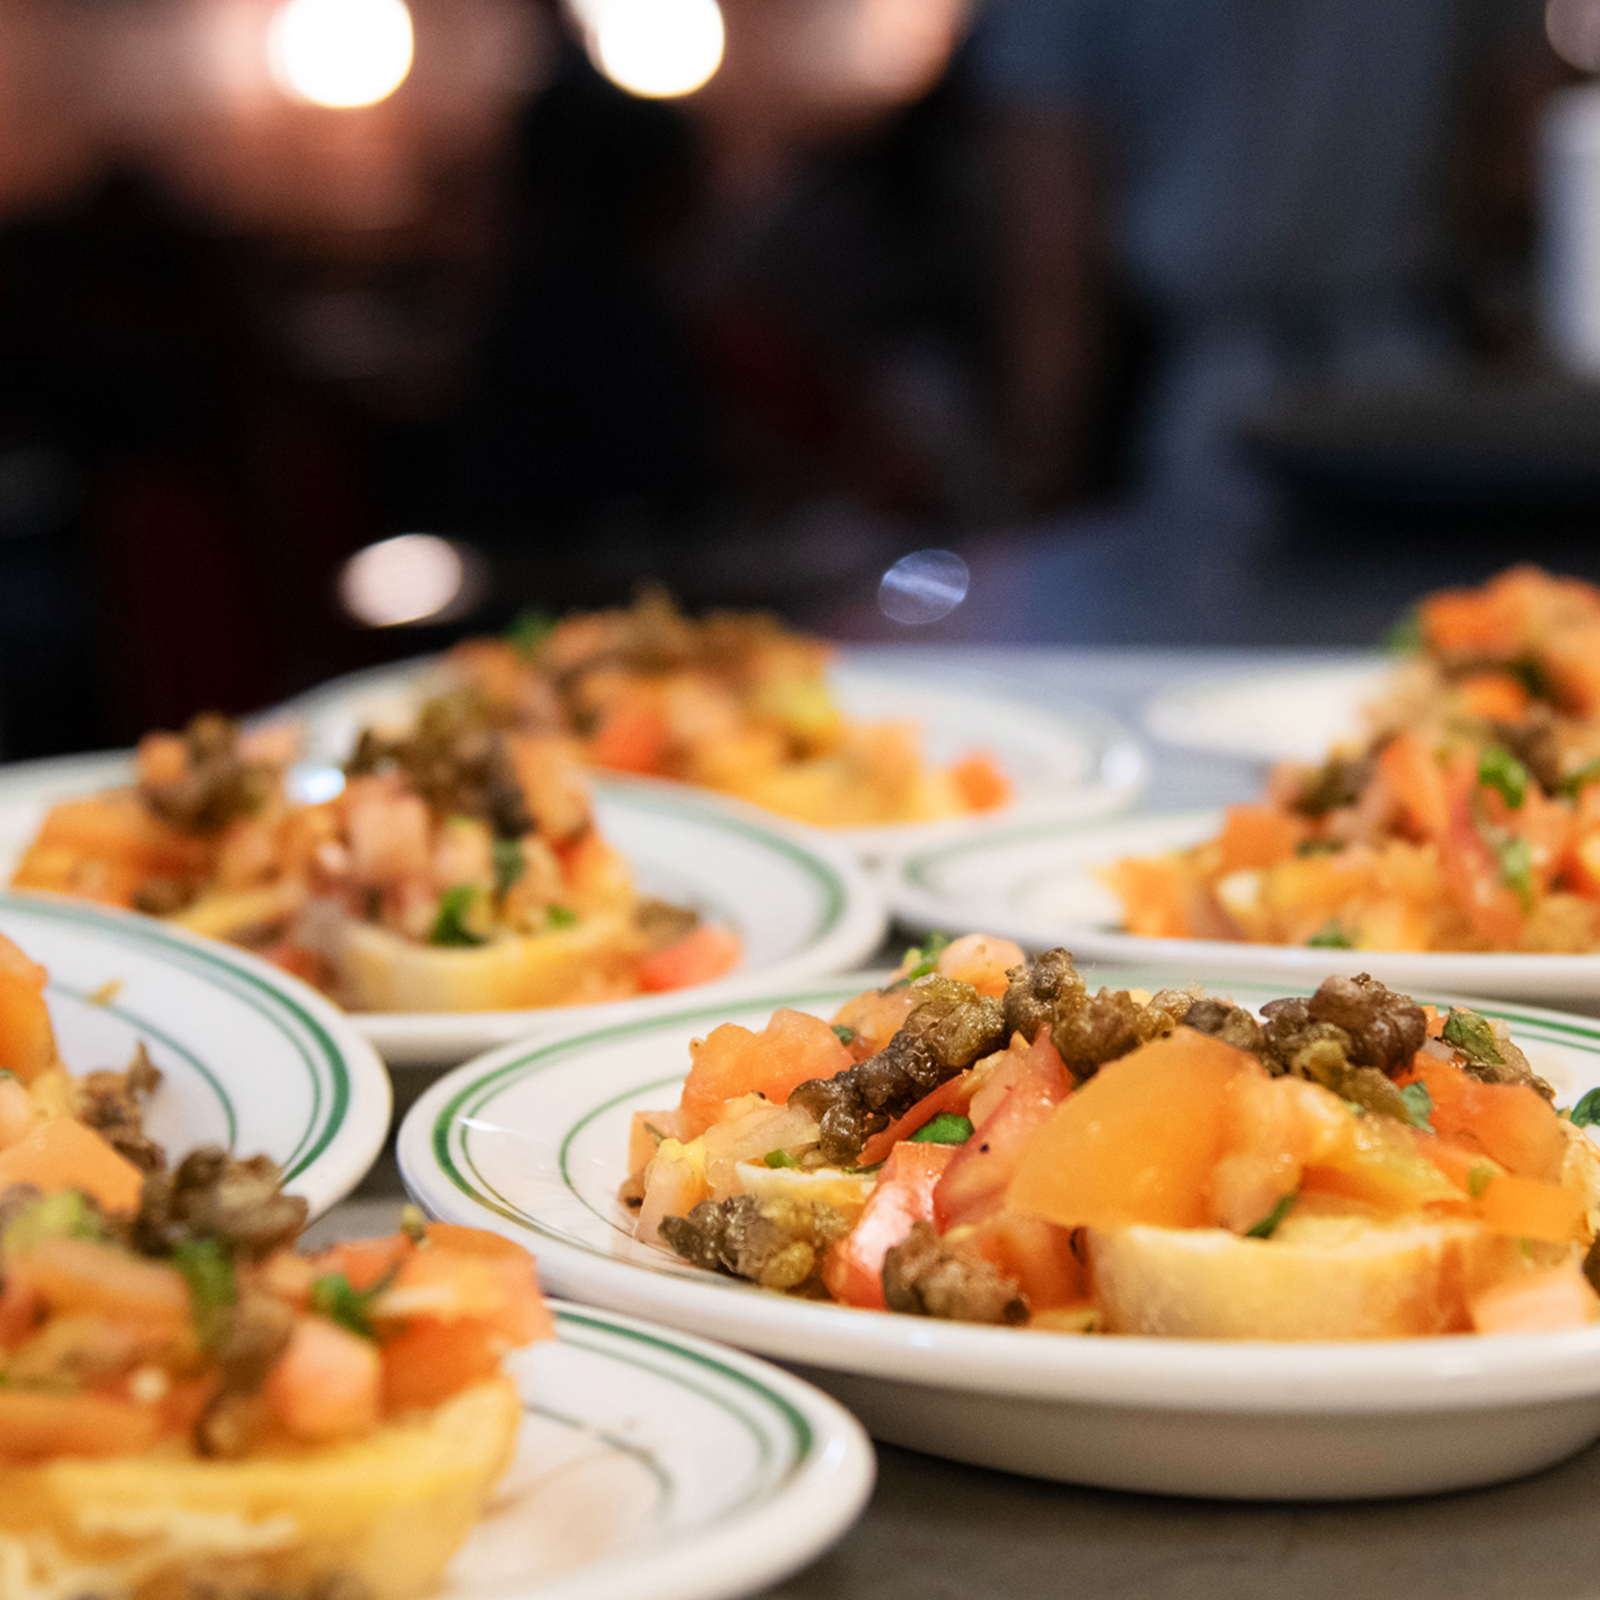 Plenty of Plates meals prepared by volunteer teams for at-risk residents of the Downtown Eastside to enjoy as part of a safe, dignified sit down 3-course dining experience.